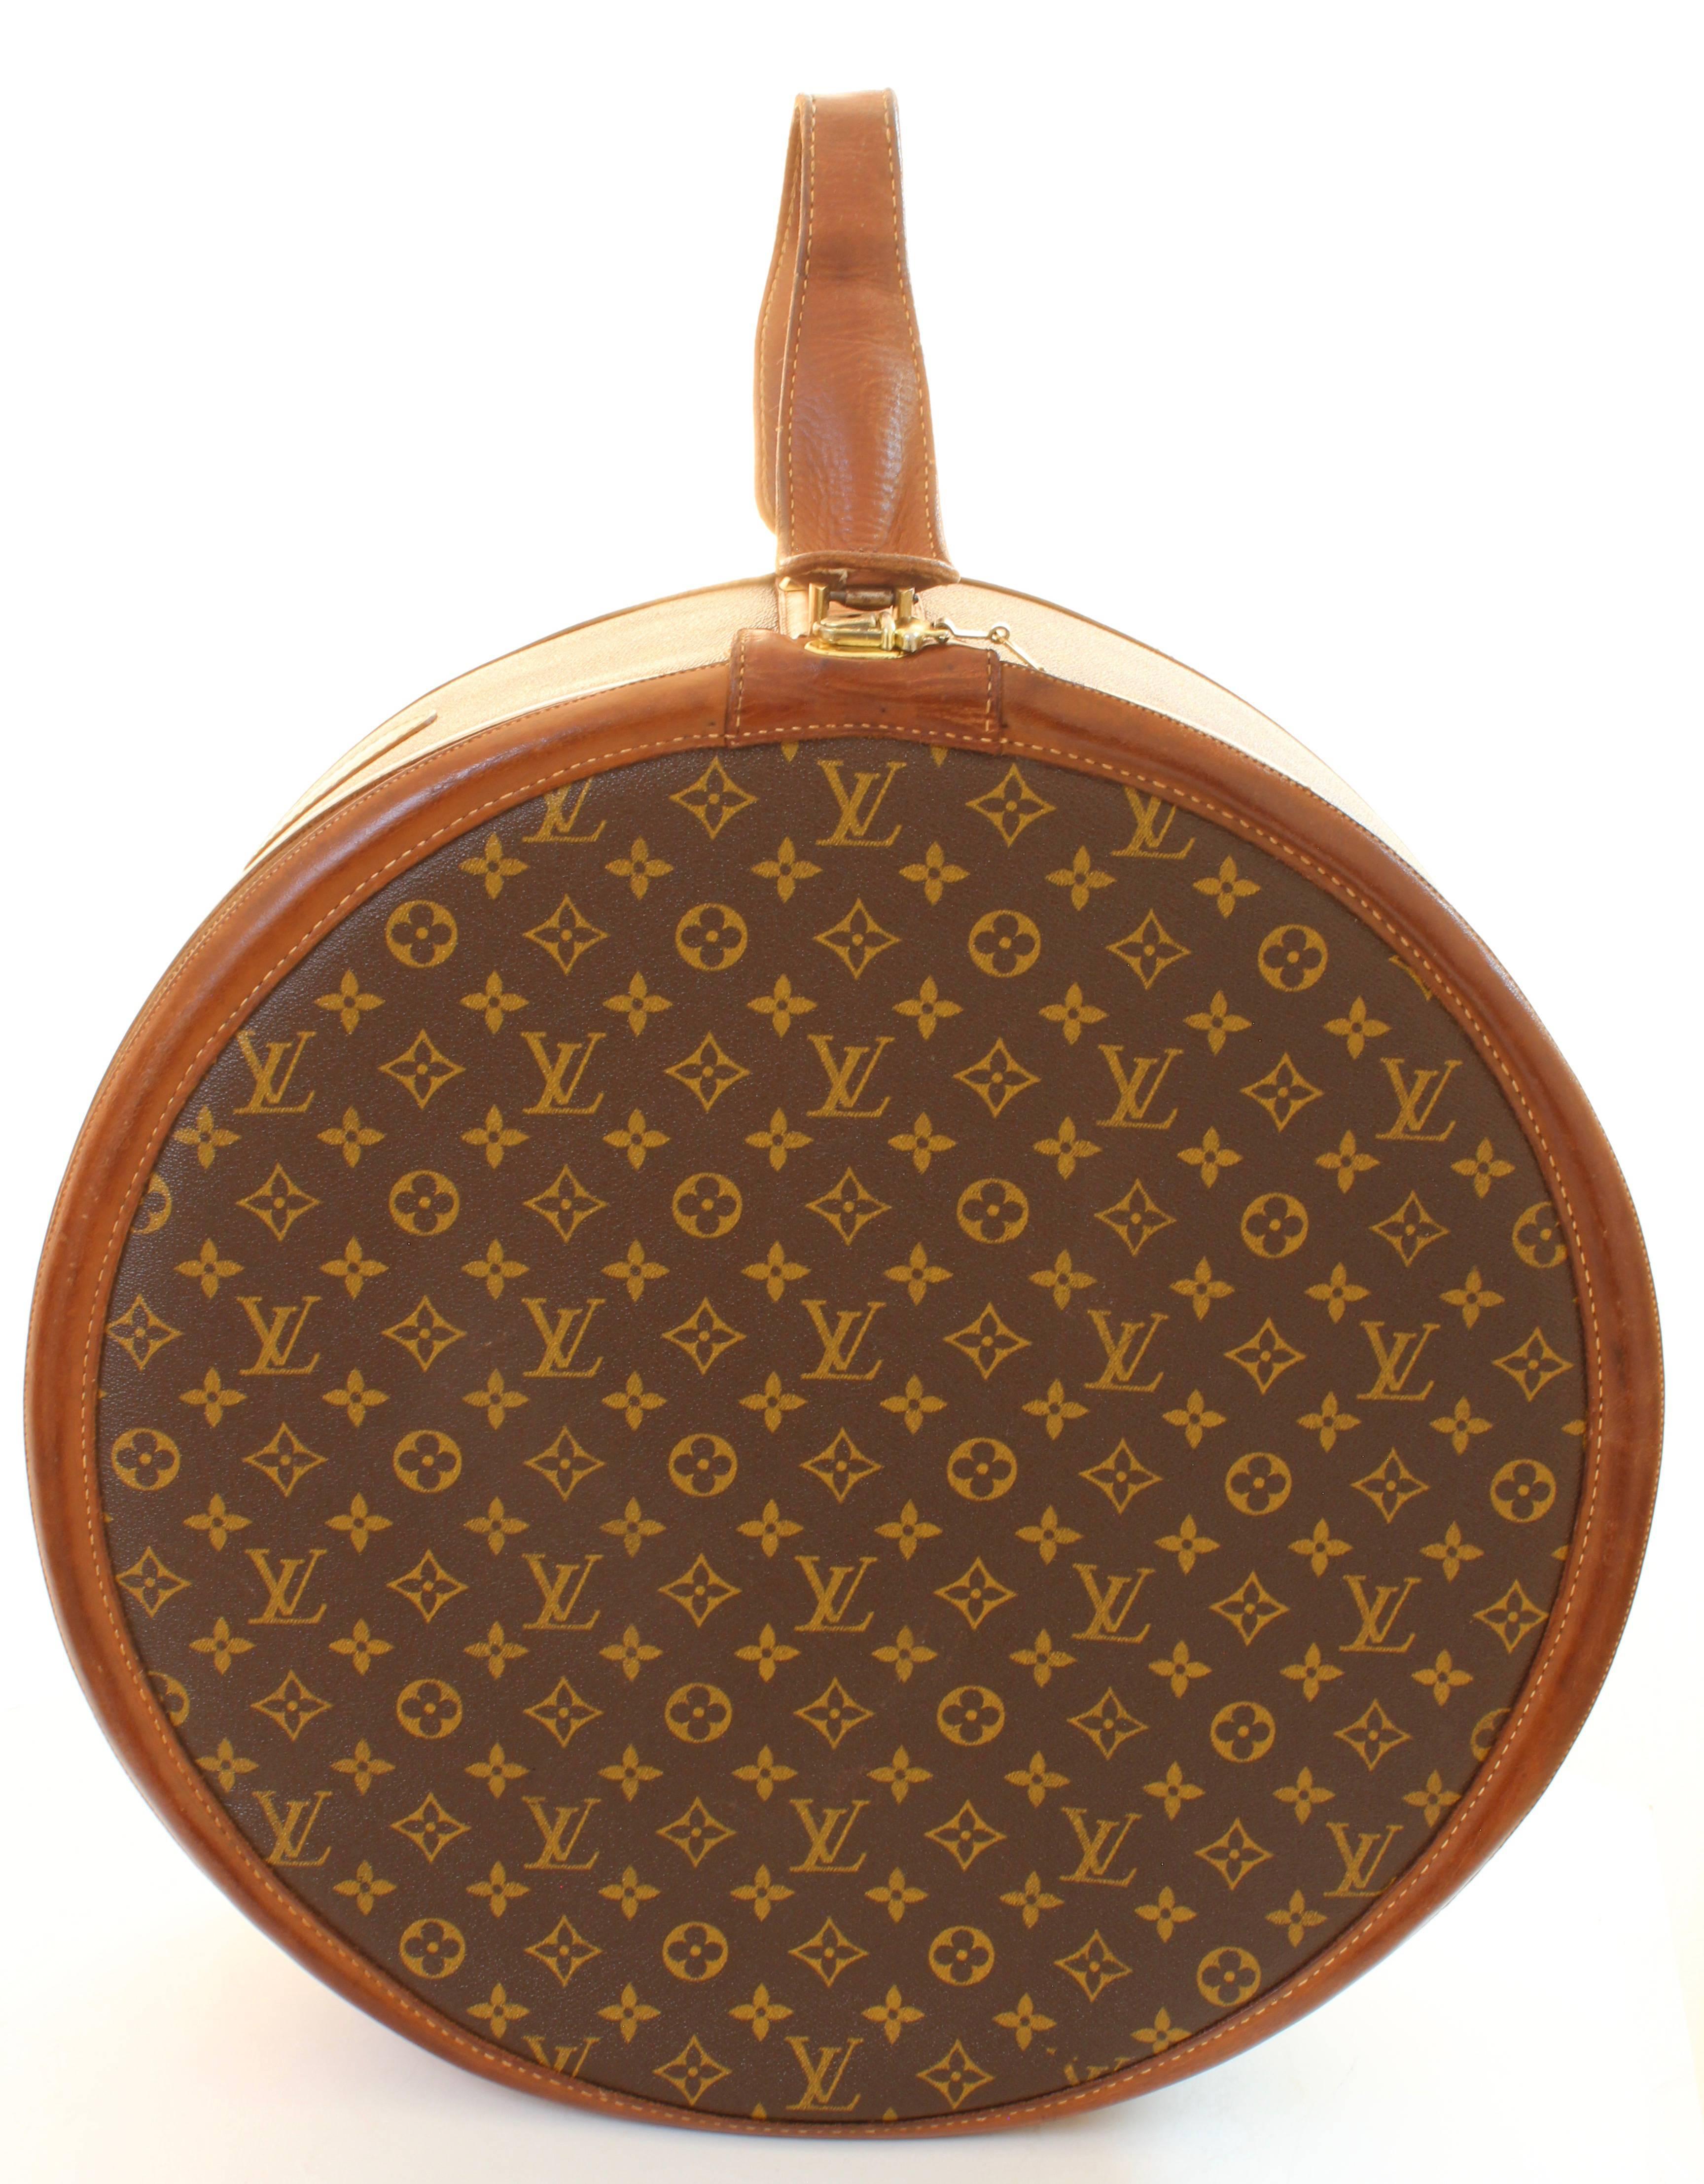 Travel in style with this fabulous round hat box or Boite Chapeaux from Louis Vuitton, and manufactured by The French Company under special license from LV in the 1970s.  Made from monogram canvas, its trimmed in finished leather and fastens with a